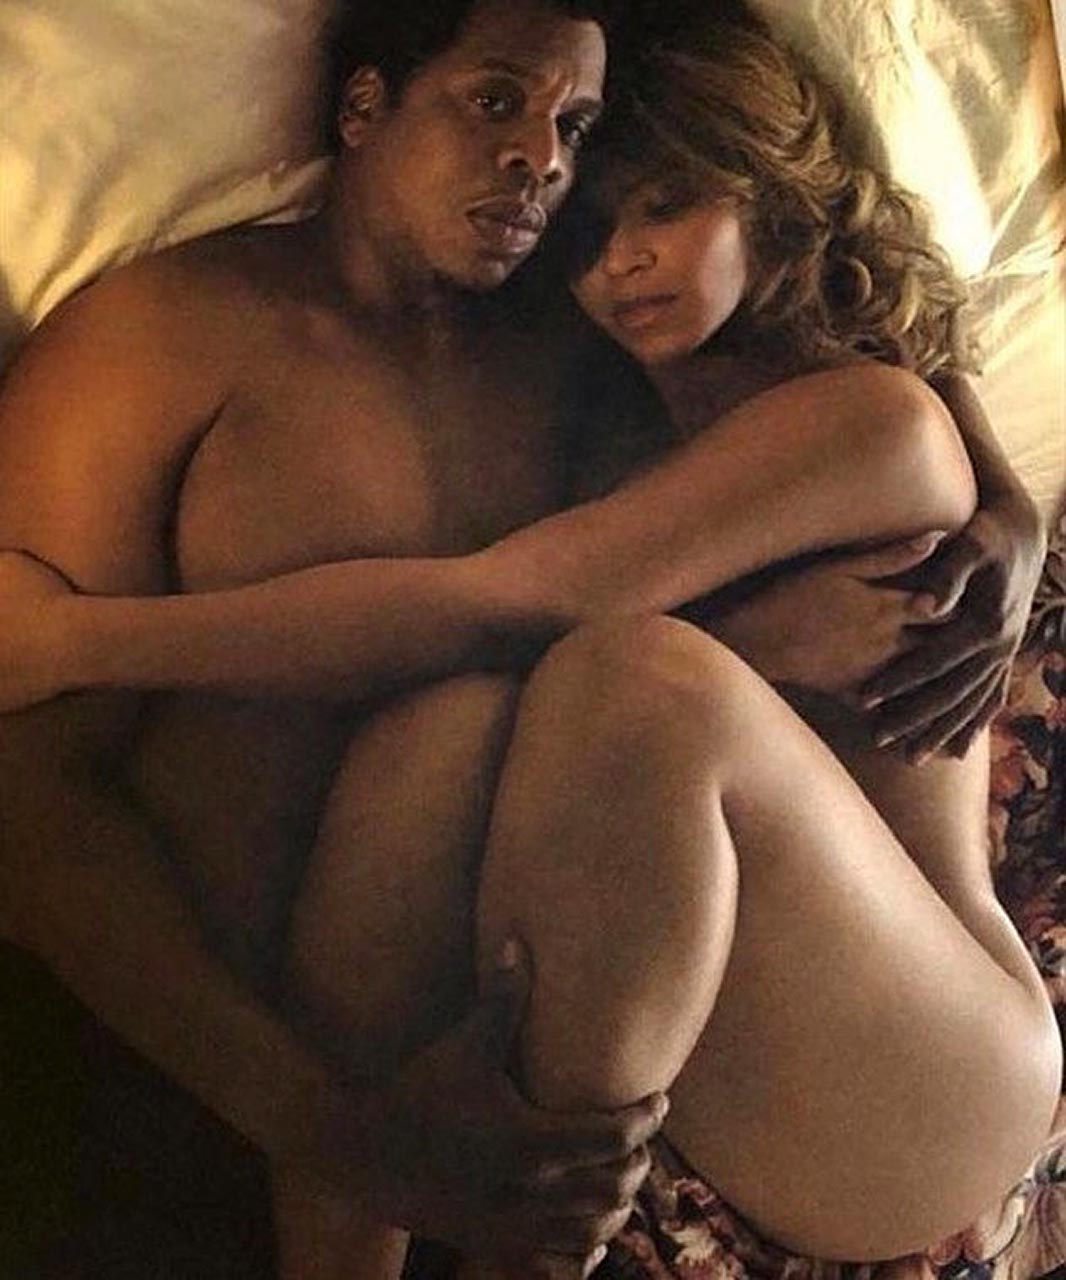 Beyonce Nude Ass In The Bed With Jay Z Scandal Planet